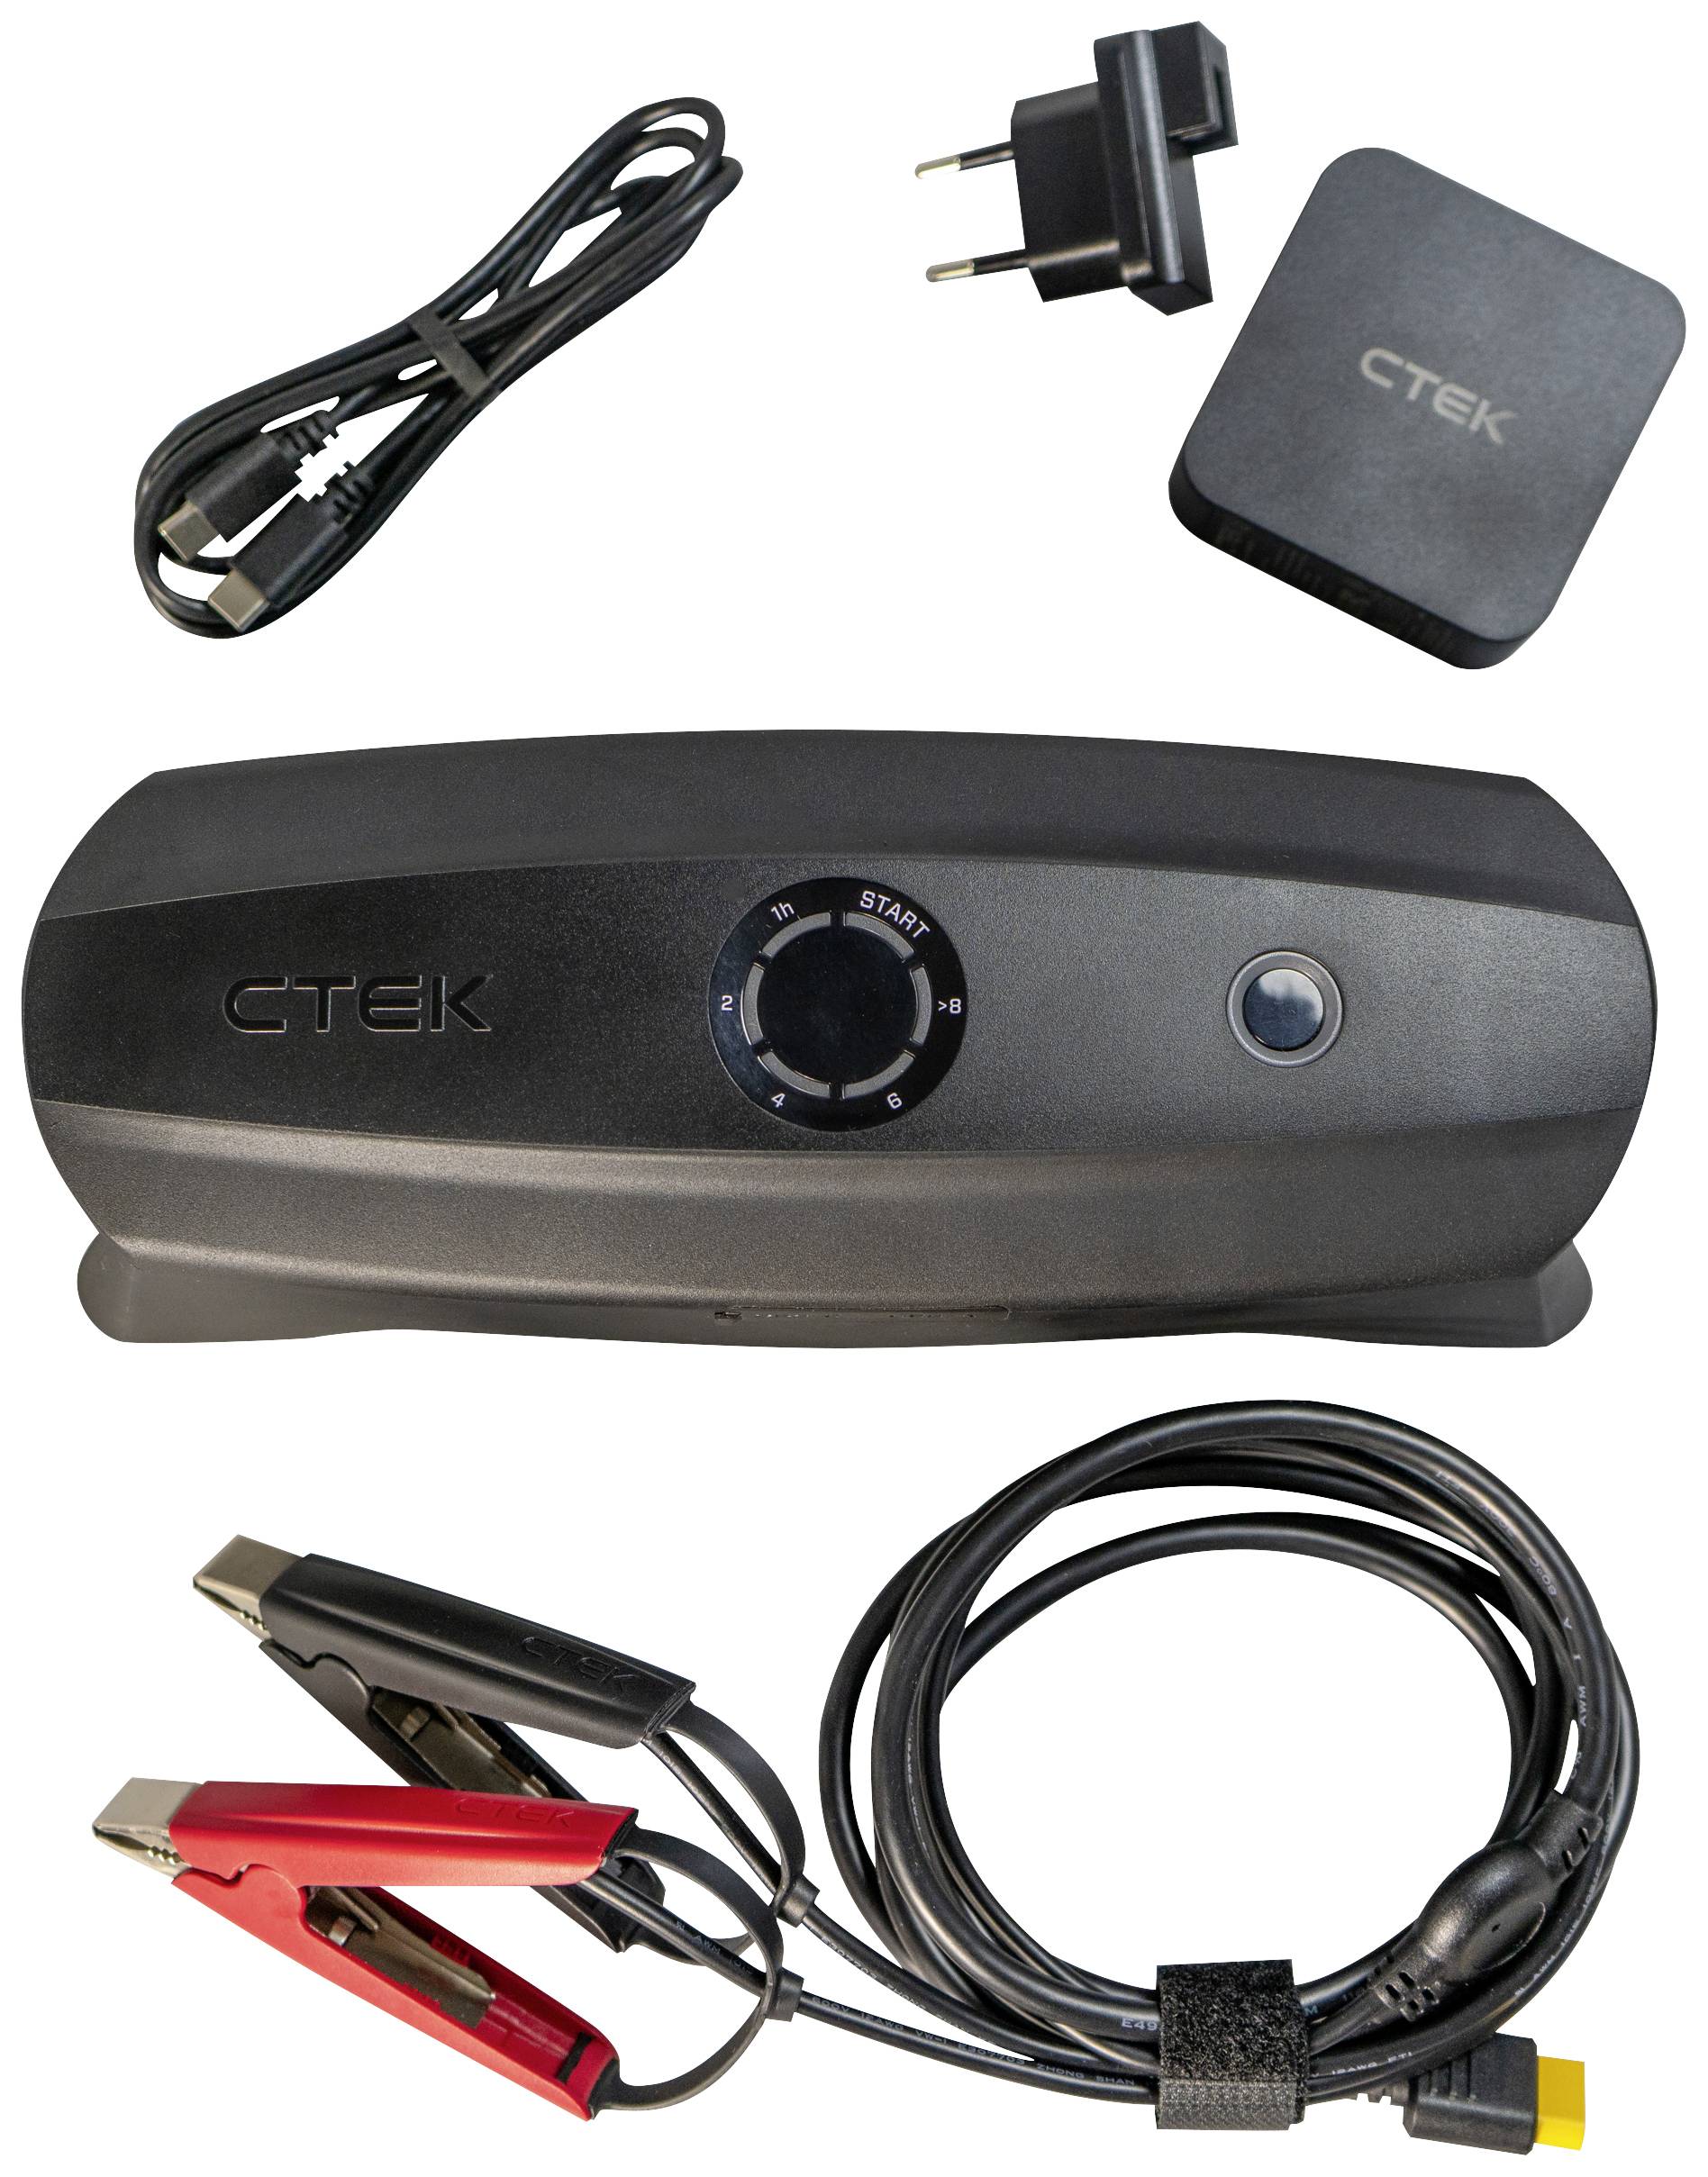 Buy the CTEK 40-462 CS Free Charger Portable 4-in-1 Charger, Maintaner,  ( 40-462 ) online